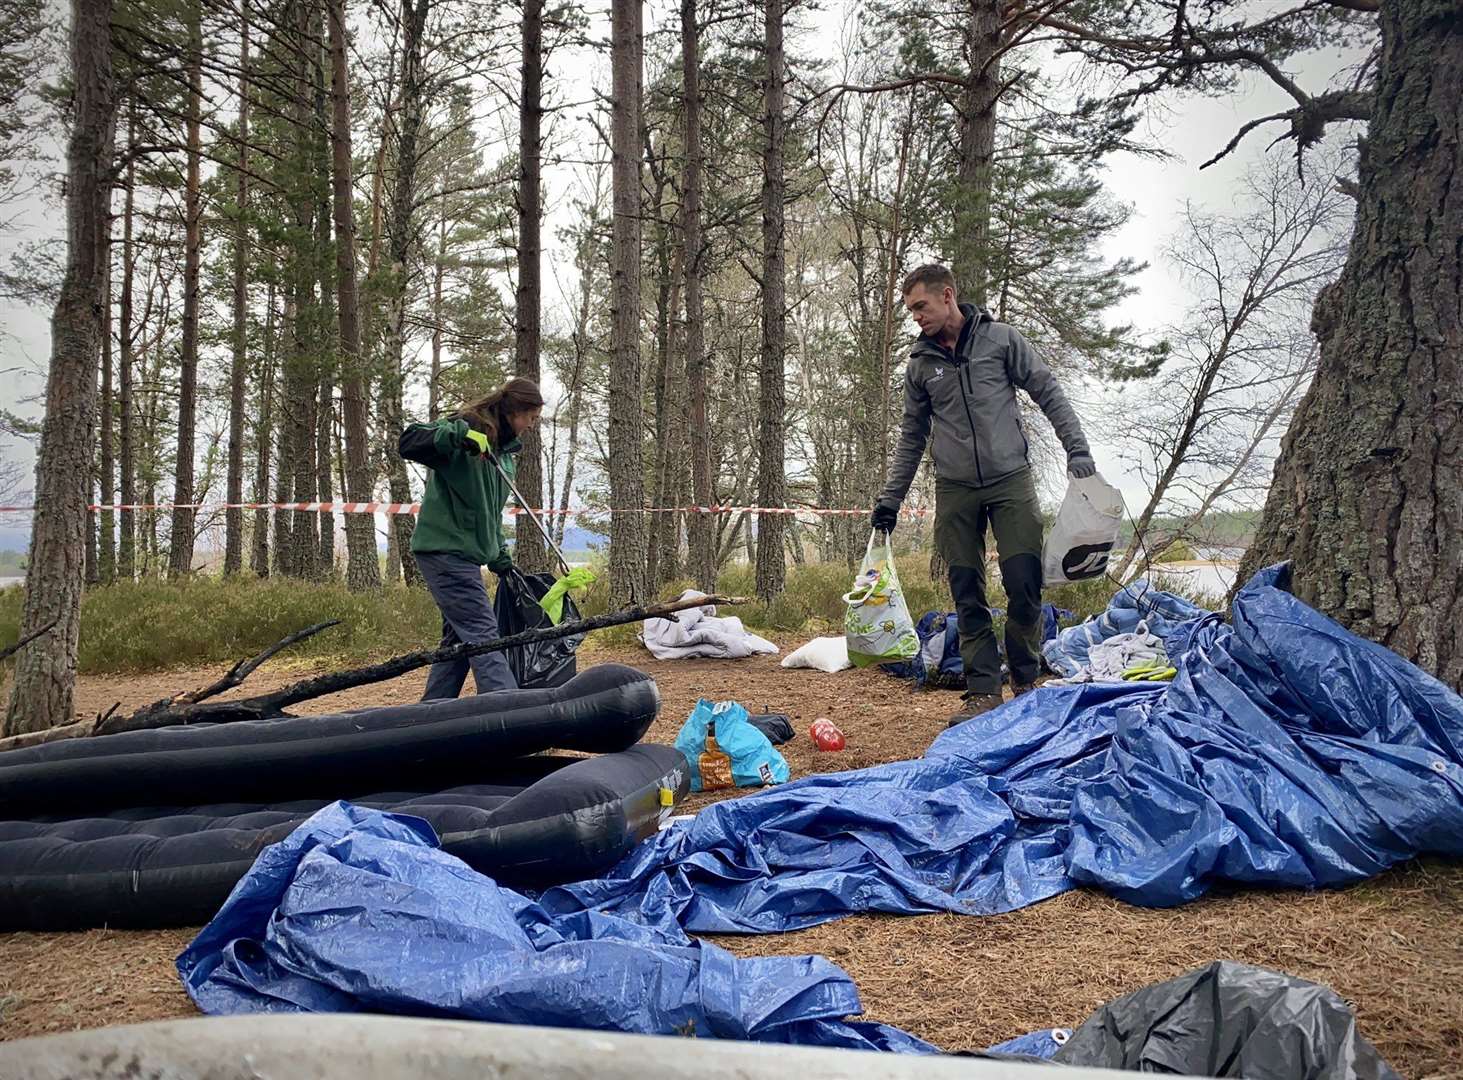 Rangers get to work clearing the dirty campers' rubbish at Loch Morlich.